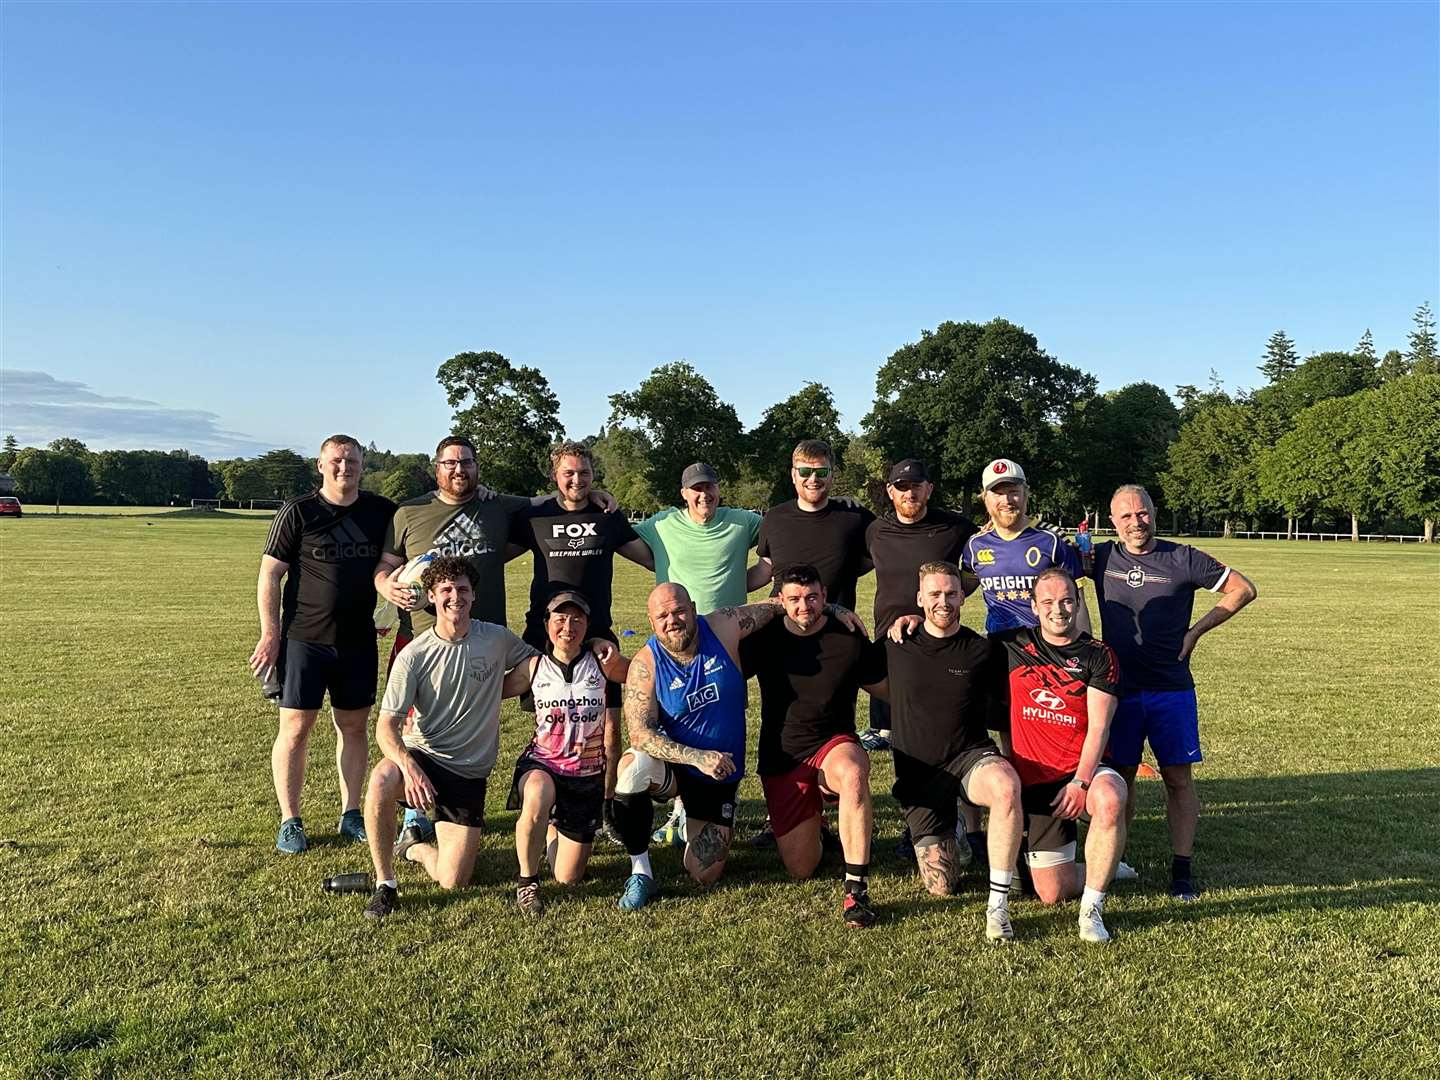 The Inverness Lynx Touch Rugby squad plays at Bught Park every Monday evening.